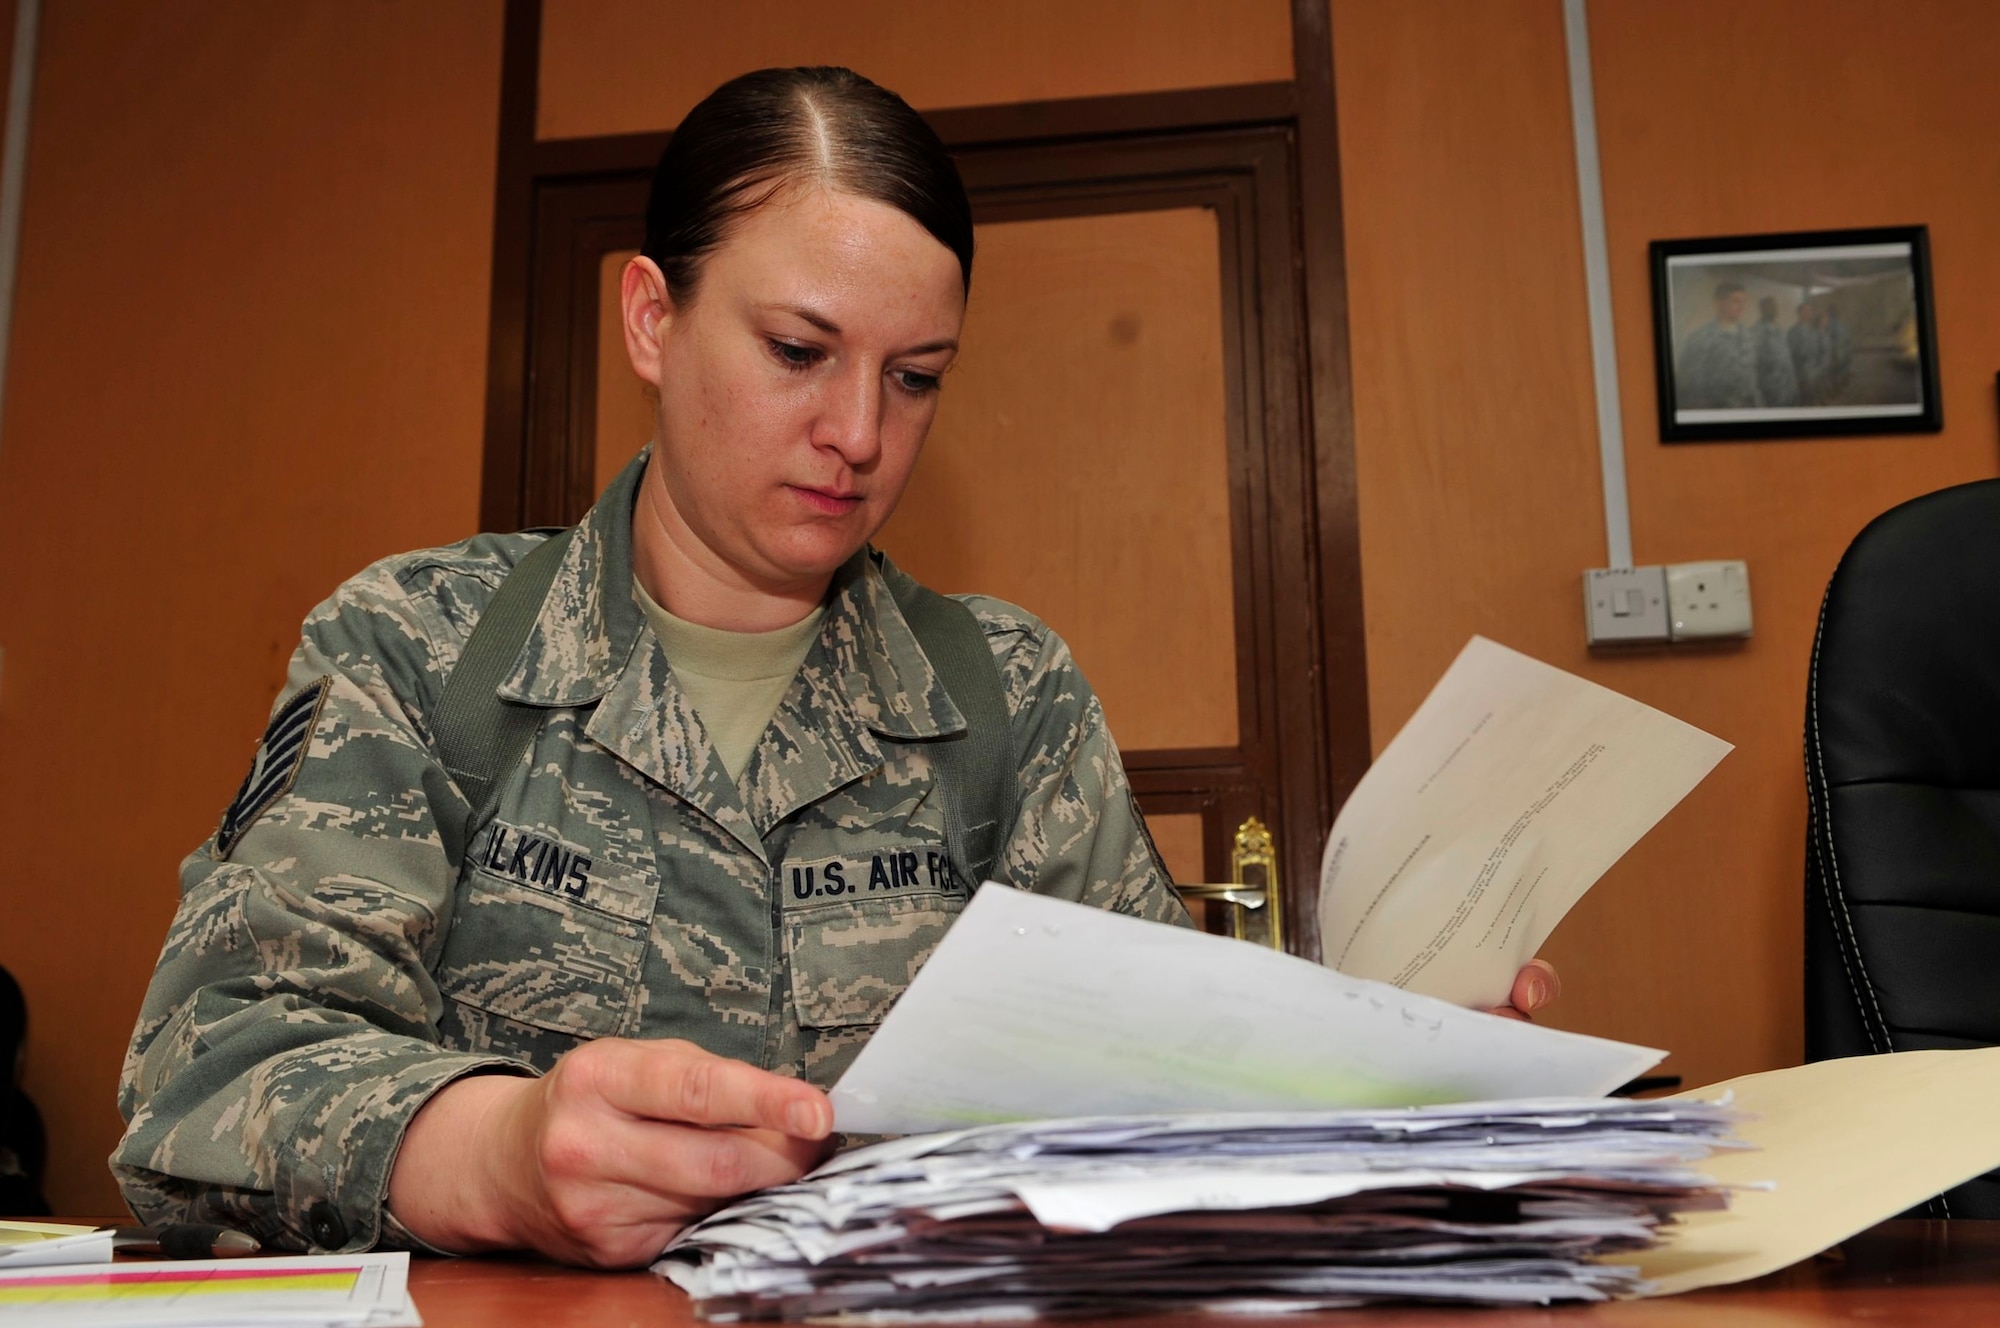 U.S. Air Force Tech. Sgt. Diana Wilkins, Law and Order Task Force paralegal, deployed from Buckley Air Force Base, Colo., and native of Colorado Springs, Colo., has the tedious task of reviewing thousands of paper files and millions of megabytes of electronic data to piece together a case at Joint Security Station Shield, Baghdad, Iraq, April 7, 2011. Her work builds a case file that she turns over to the Iraqi justice system to try a detainee in Iraqi custody. (U.S. Air Force photo by Senior Master Sgt. Larry A. Schneck/Released)